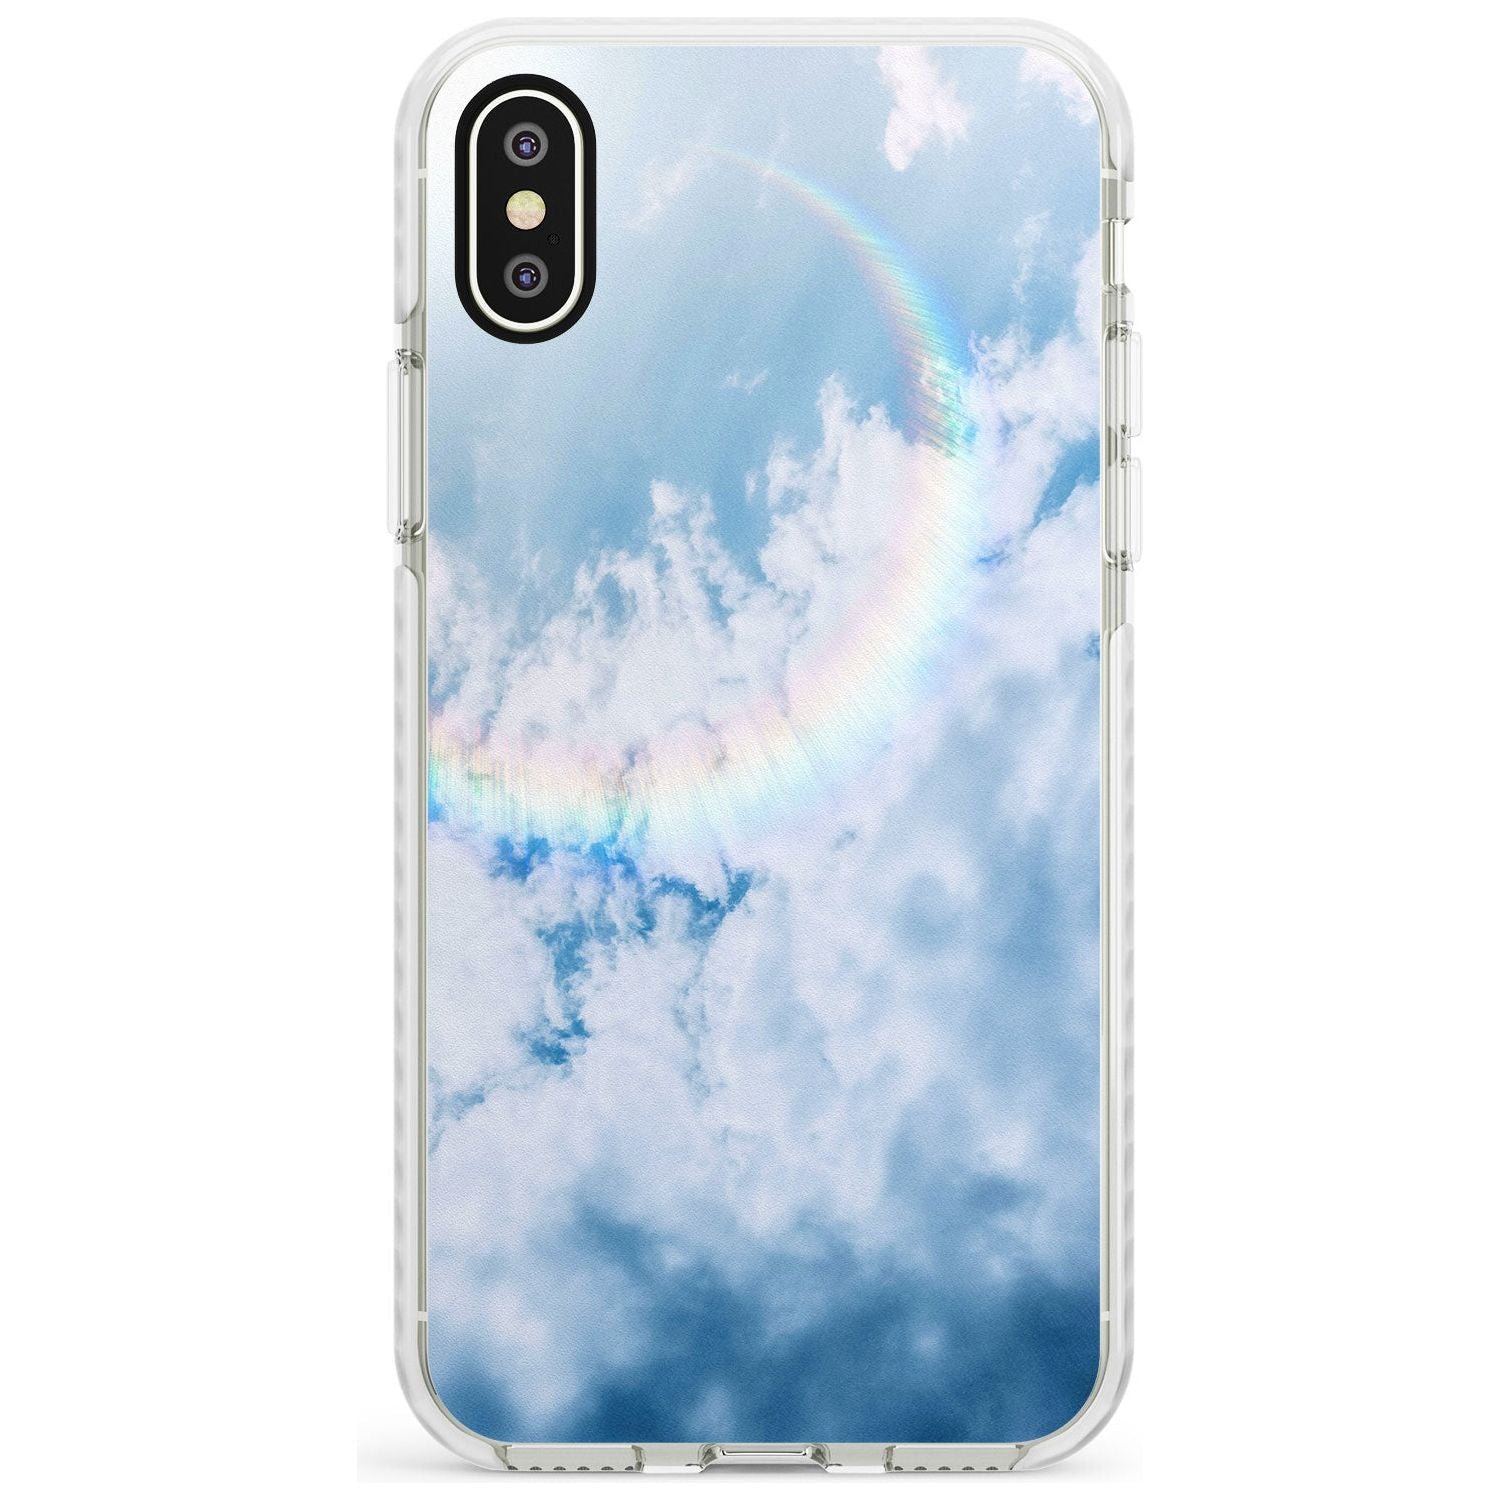 Rainbow Light Flare Photograph Impact Phone Case for iPhone X XS Max XR